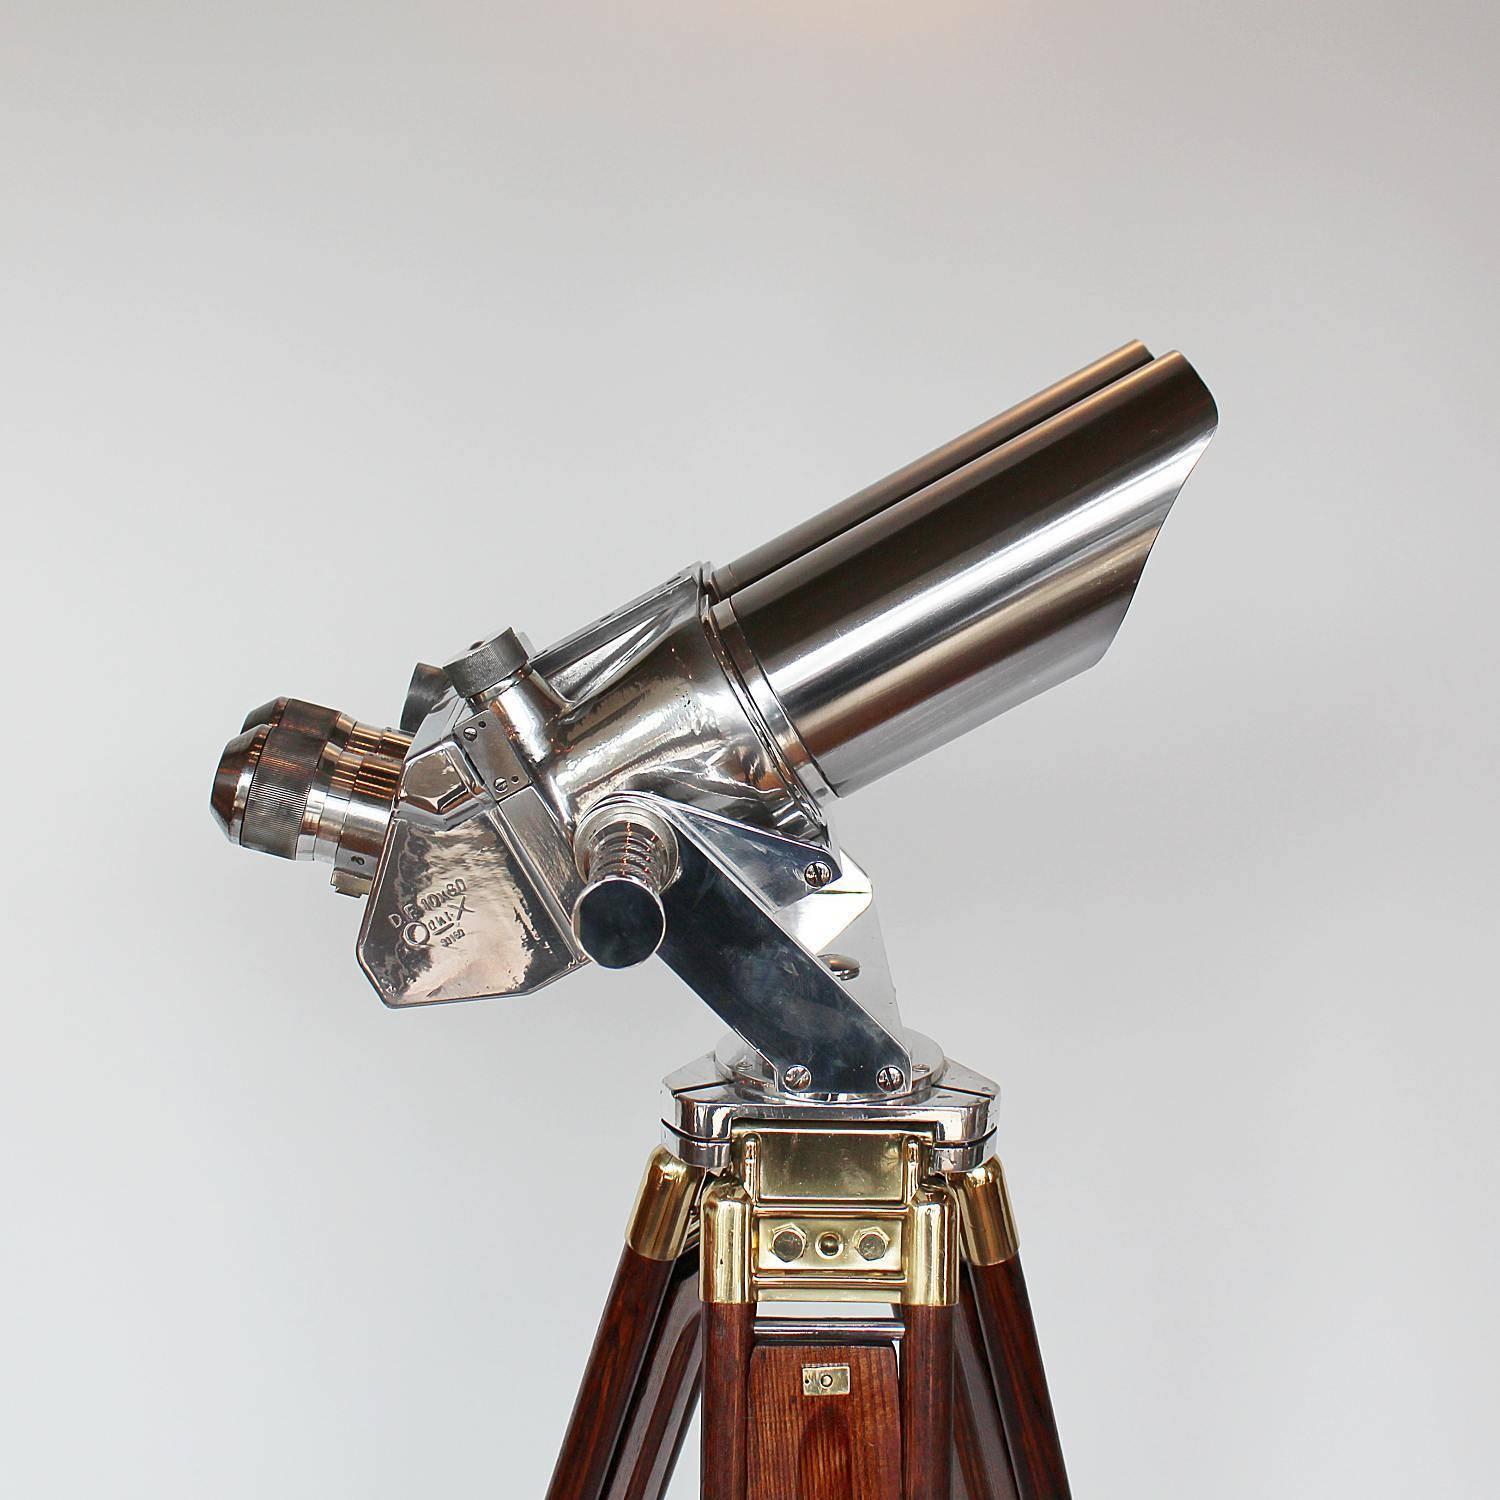 A pair of Zeiss 10x80 binoculars with eyepieces set at 45 degrees. Set on period, extending oak and brass stand with chromed conical feet by Zeiss. 10 times magnification with 80mm objective lens.
Paint stripped and metal polished. Fully